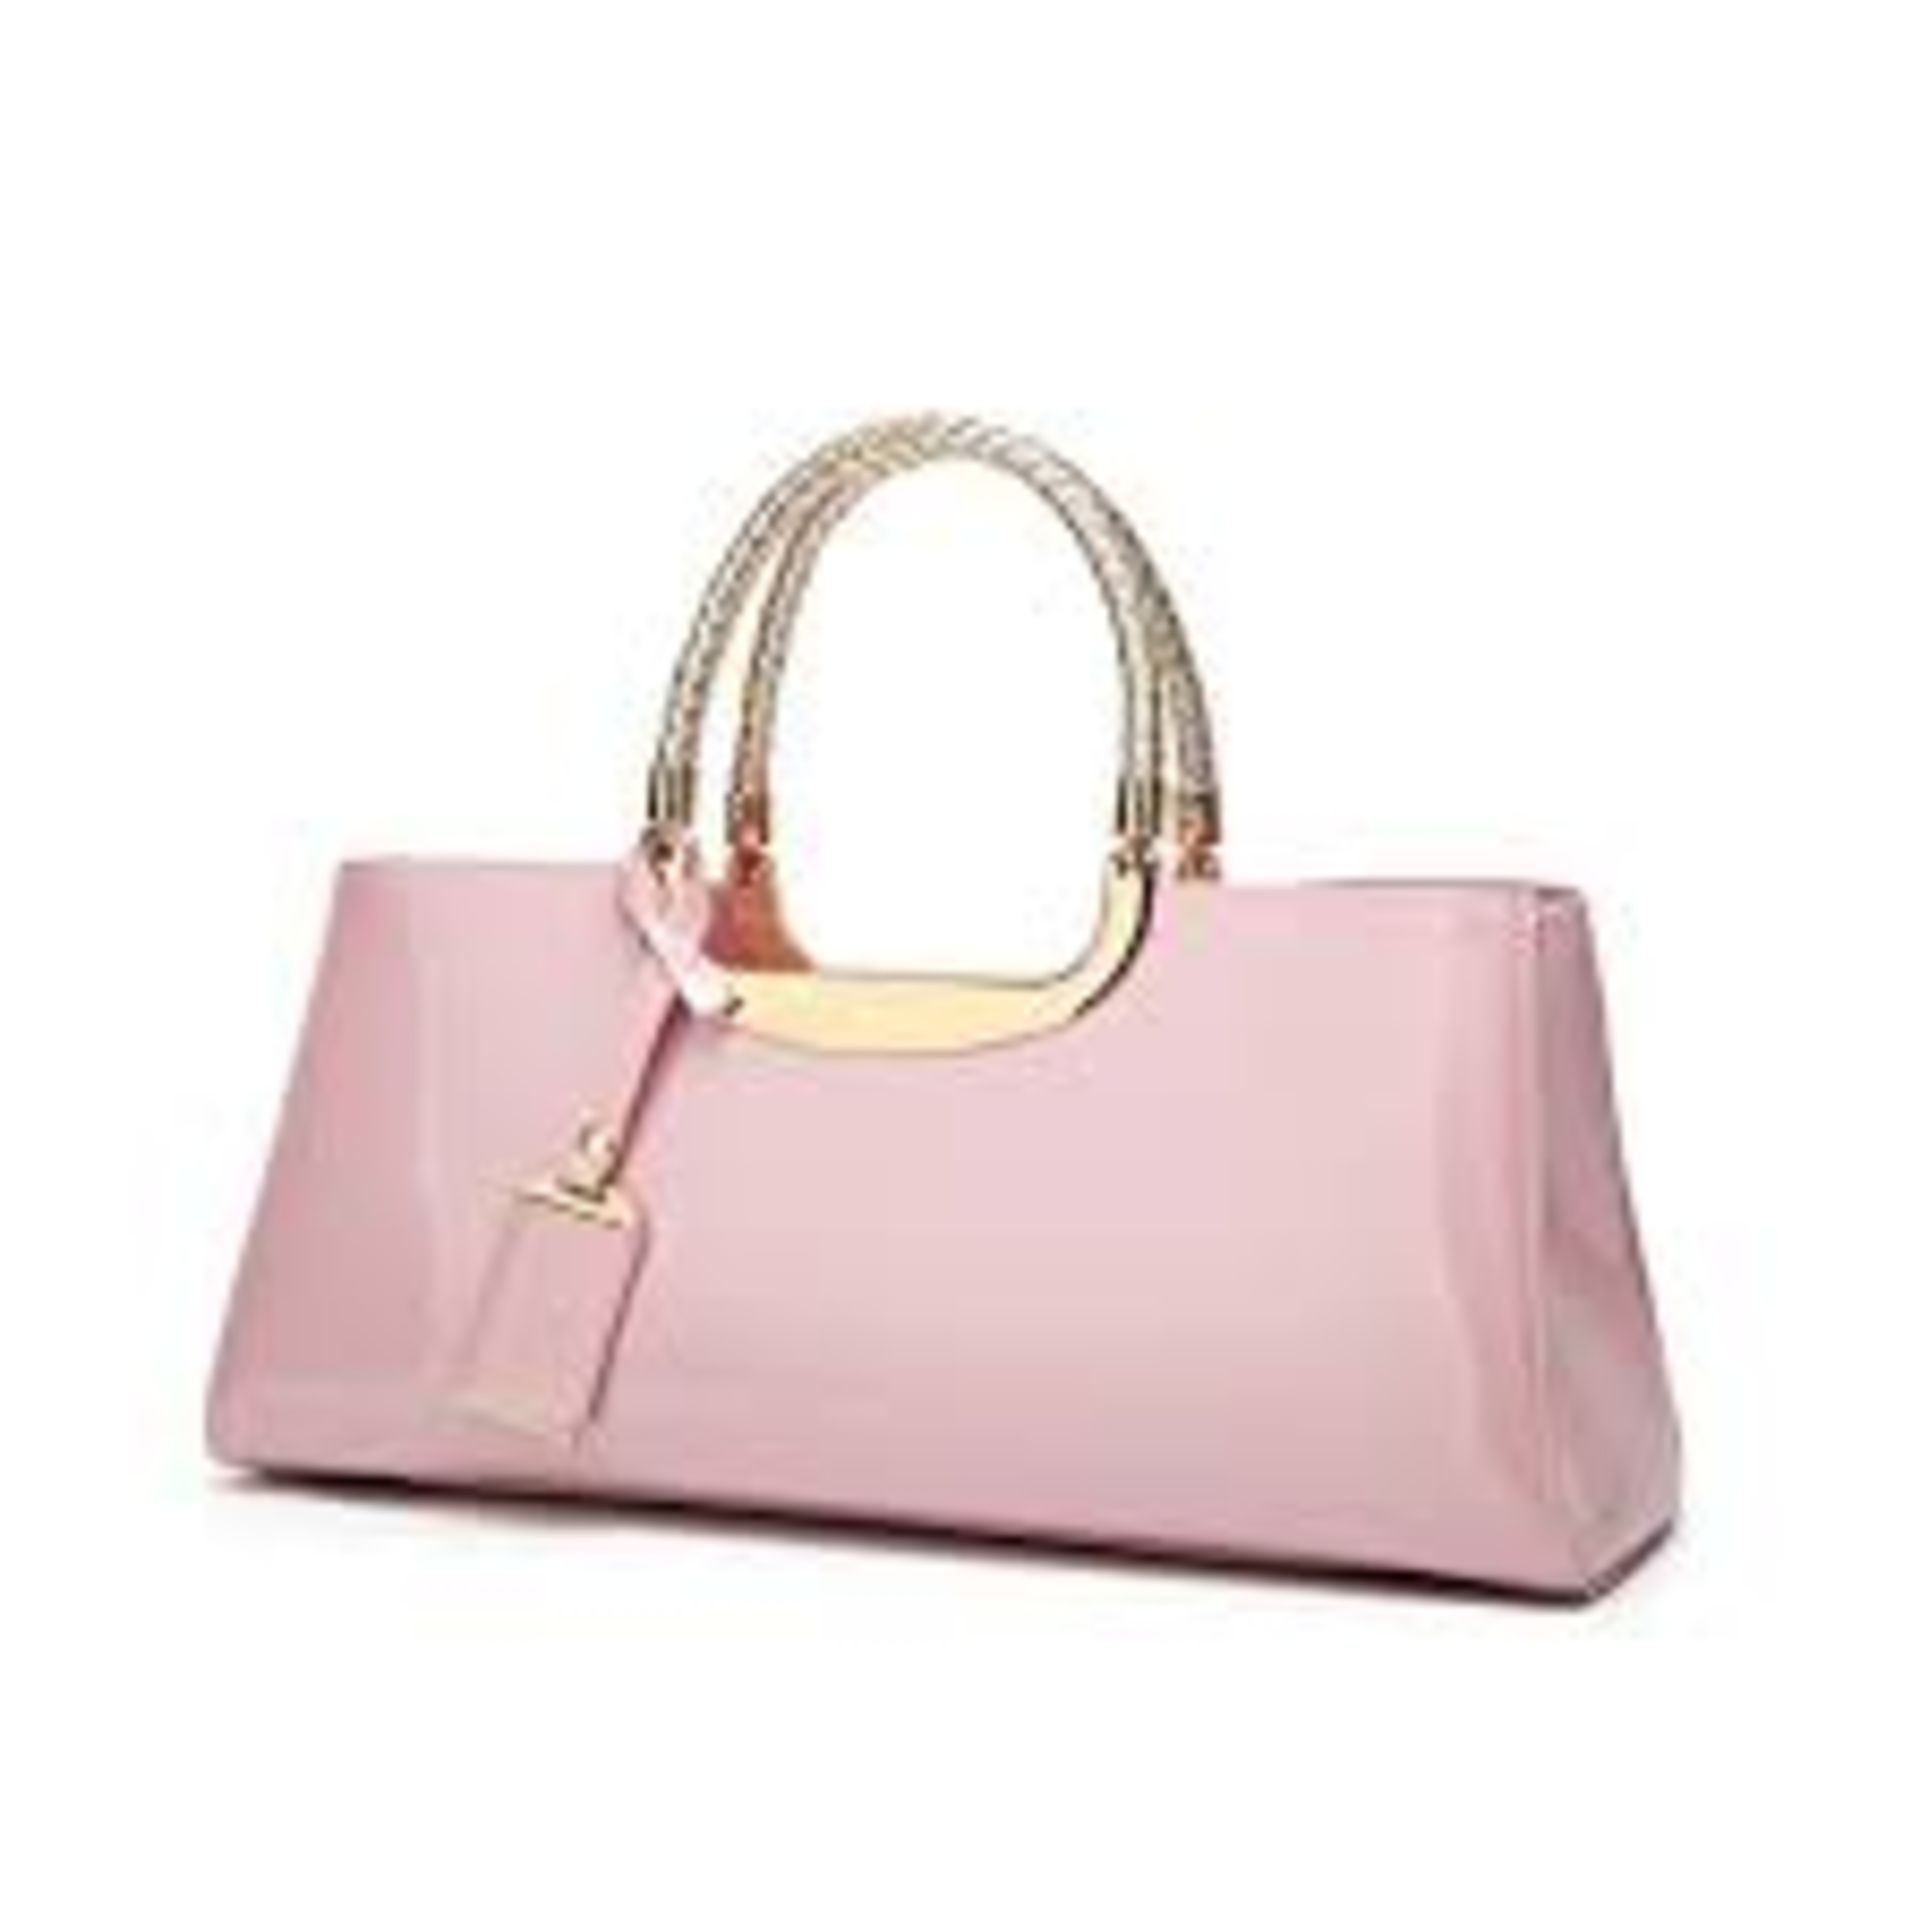 Brand New Womens Lady Shoulder Bag in Gloss Pink RRP £50